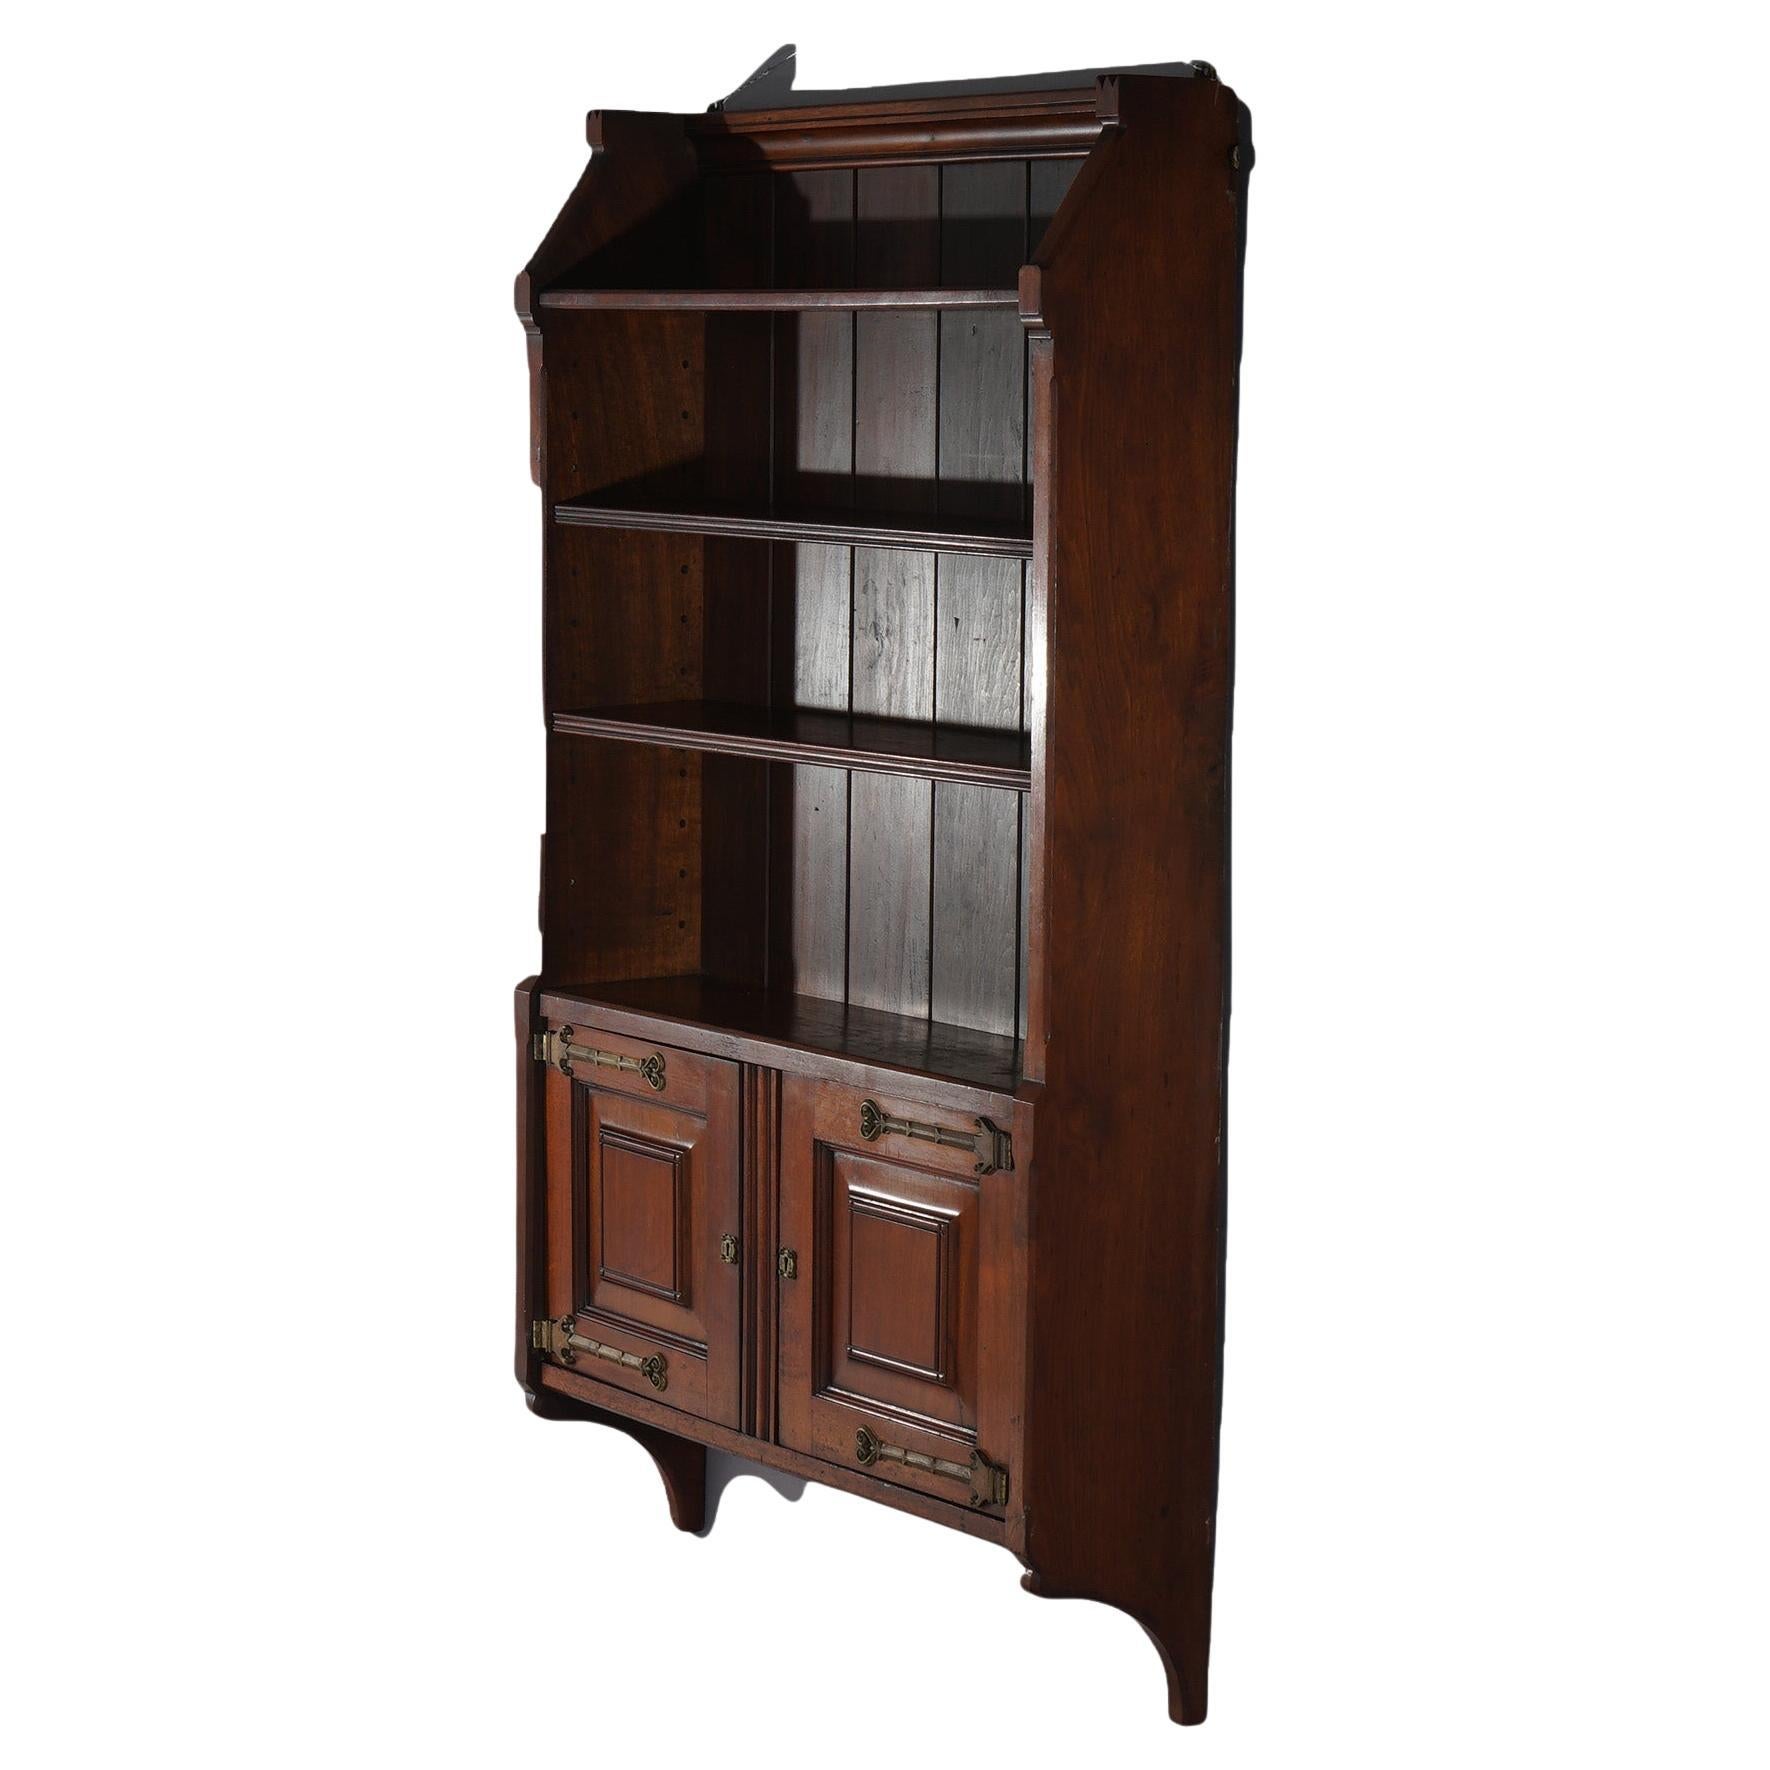 An antique Aesthetic wall shelf in the manner of Kimble & Cabus offers walnut construction with double door cabinet below shelves, c1890

Measures - 56.5